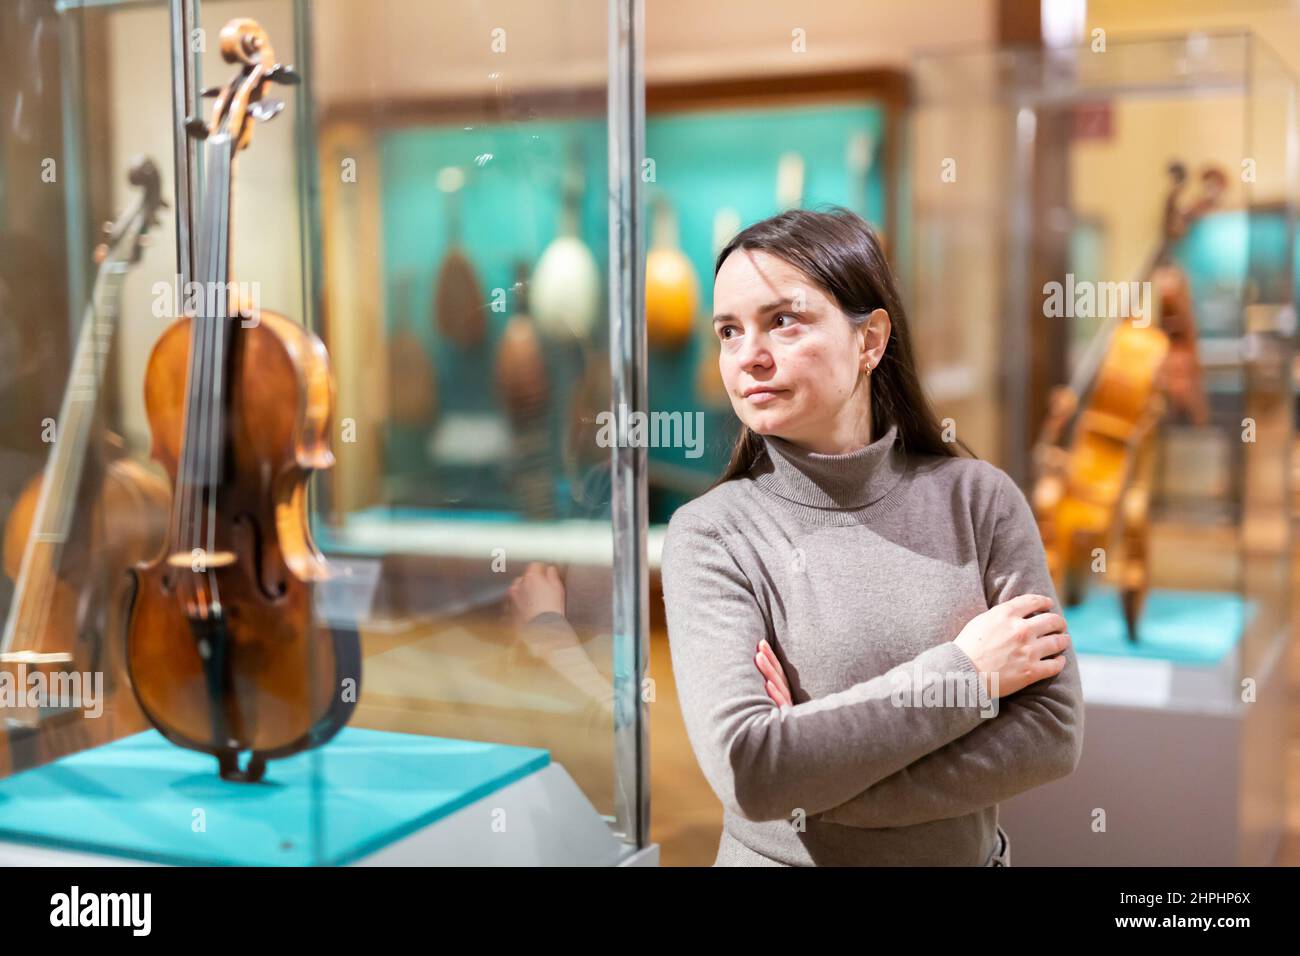 Female museum visitor examining ancient musical instruments Stock Photo